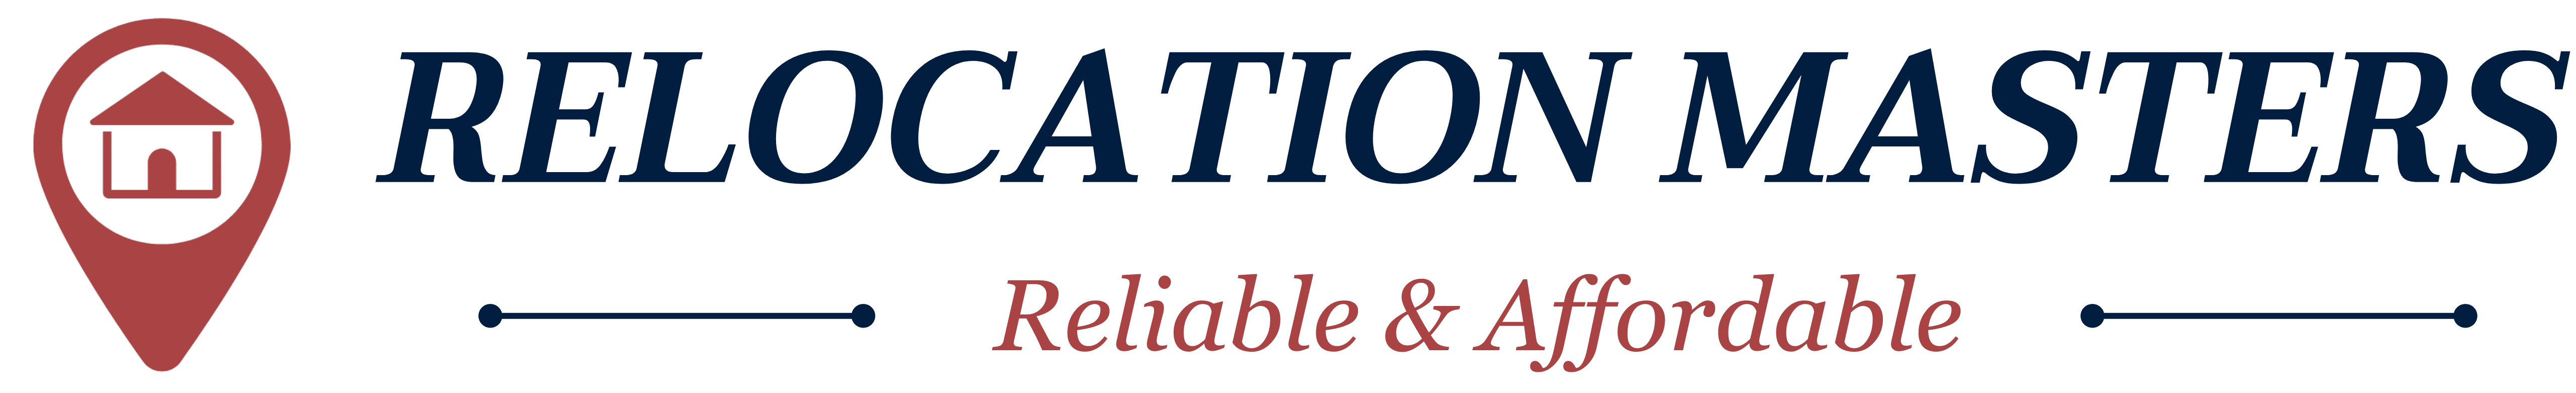 Relocation Masters New Logo With Tag